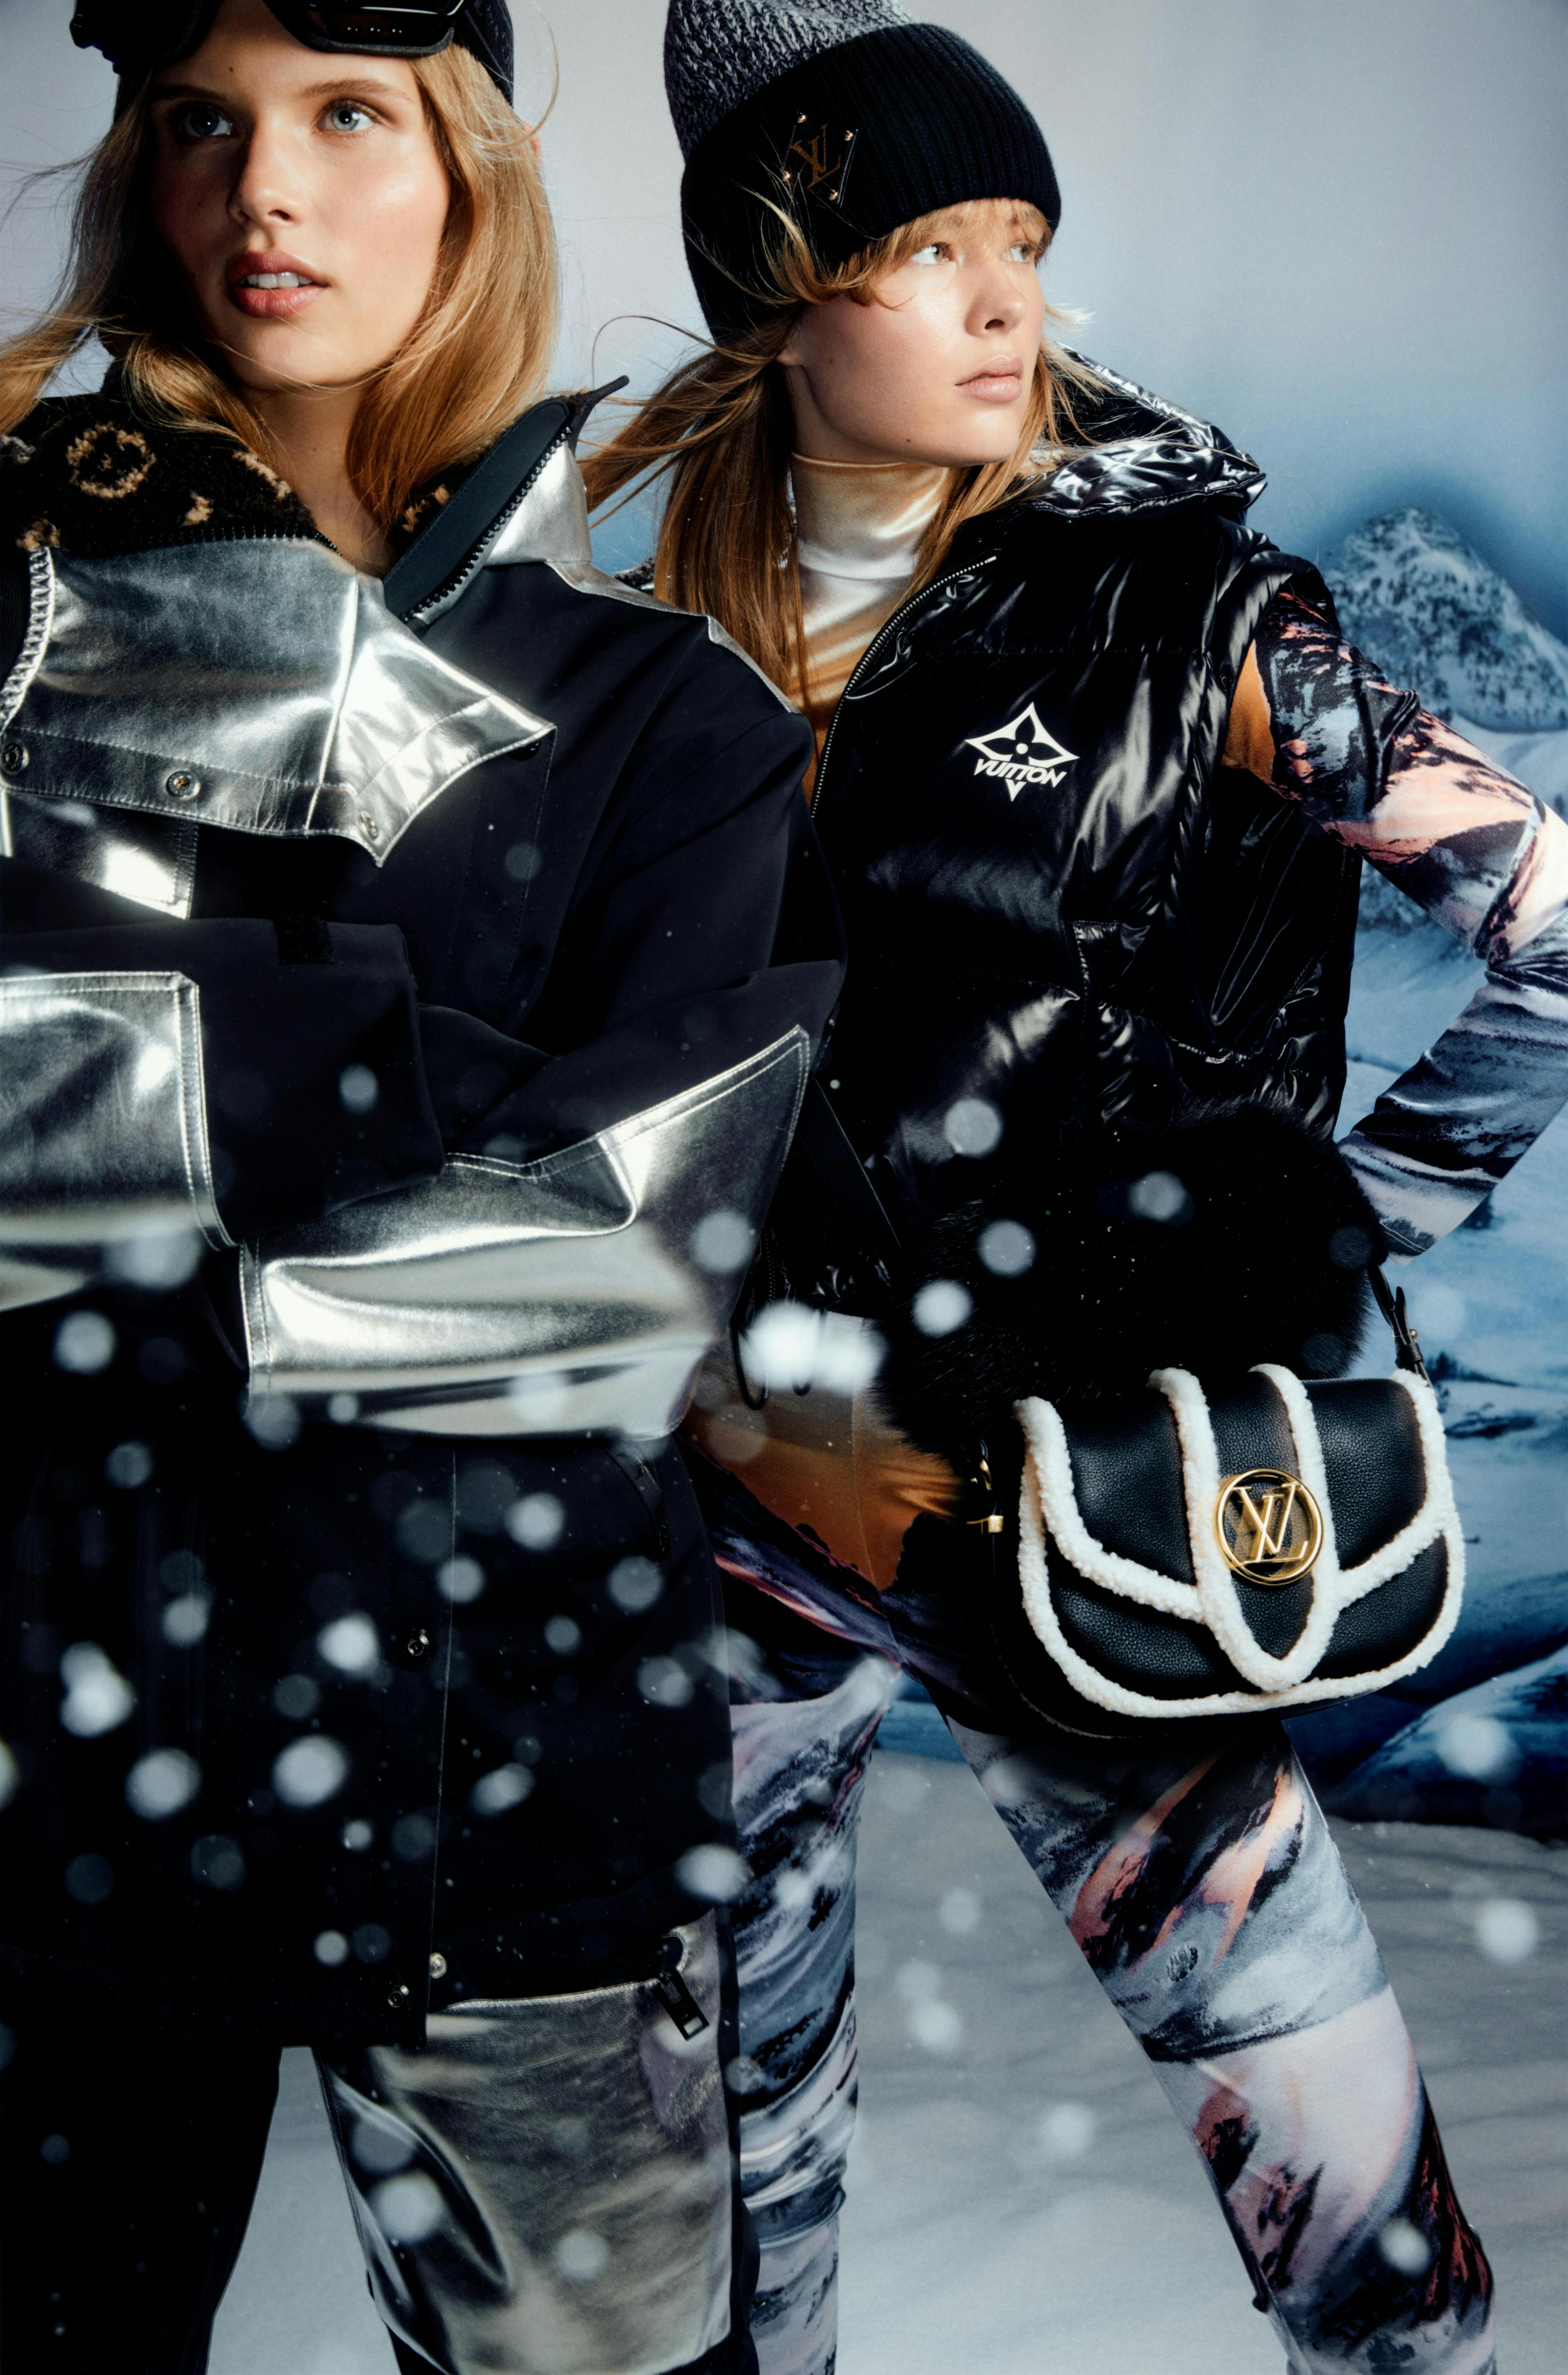 Louis Vuitton's first ever ski collection is an exercise in retro-futurism